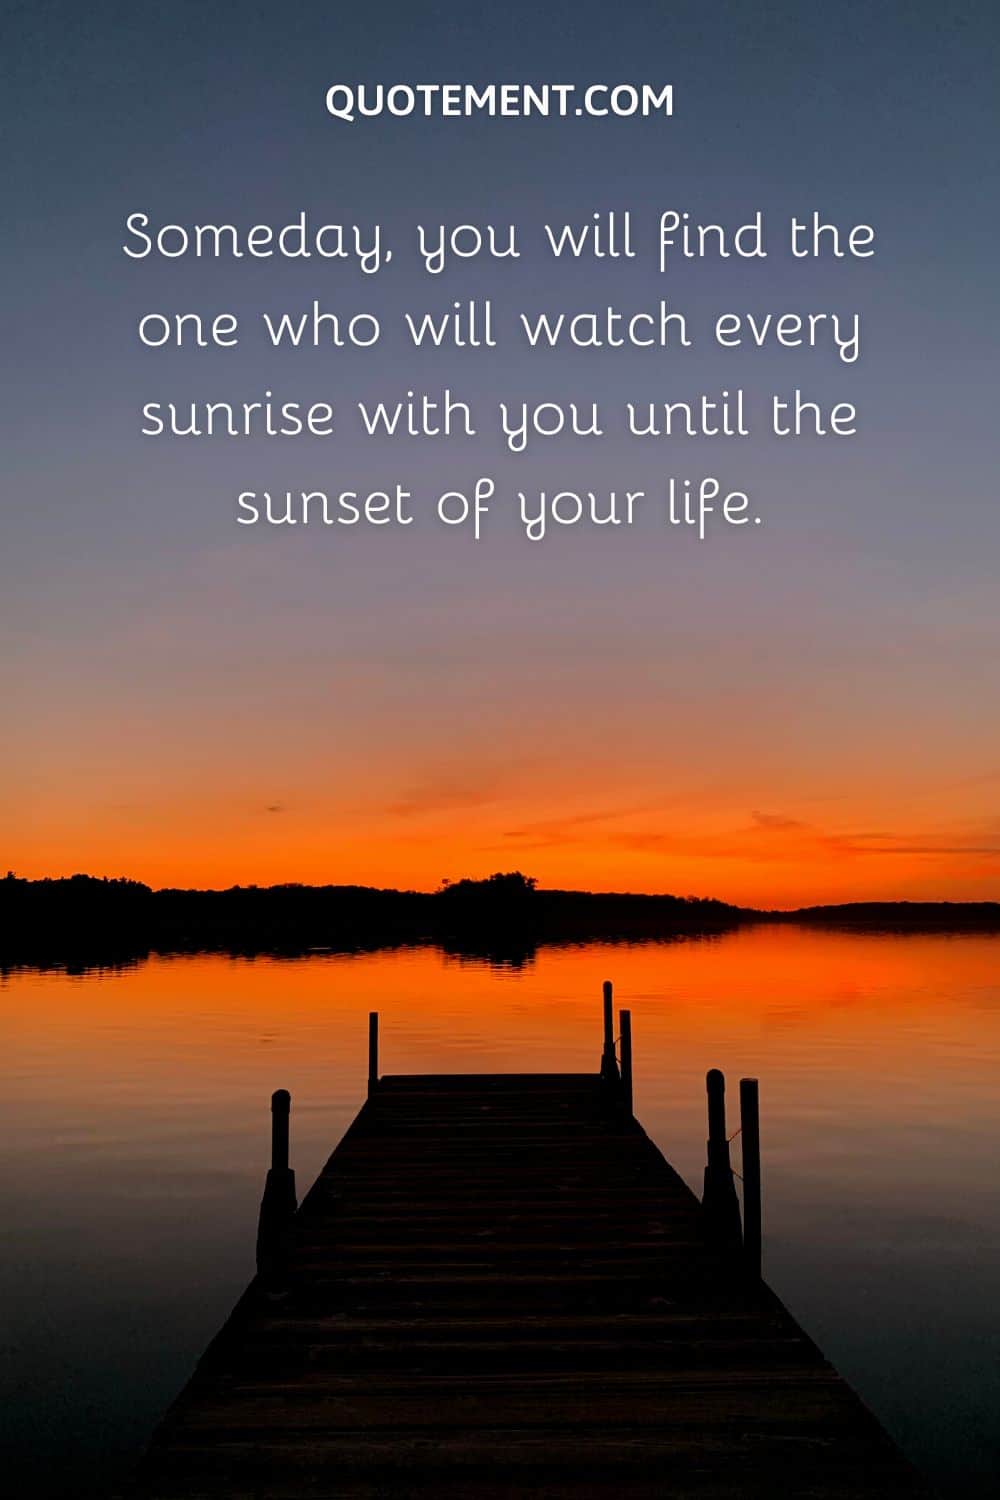 Someday, you will find the one who will watch every sunrise with you until the sunset of your life.